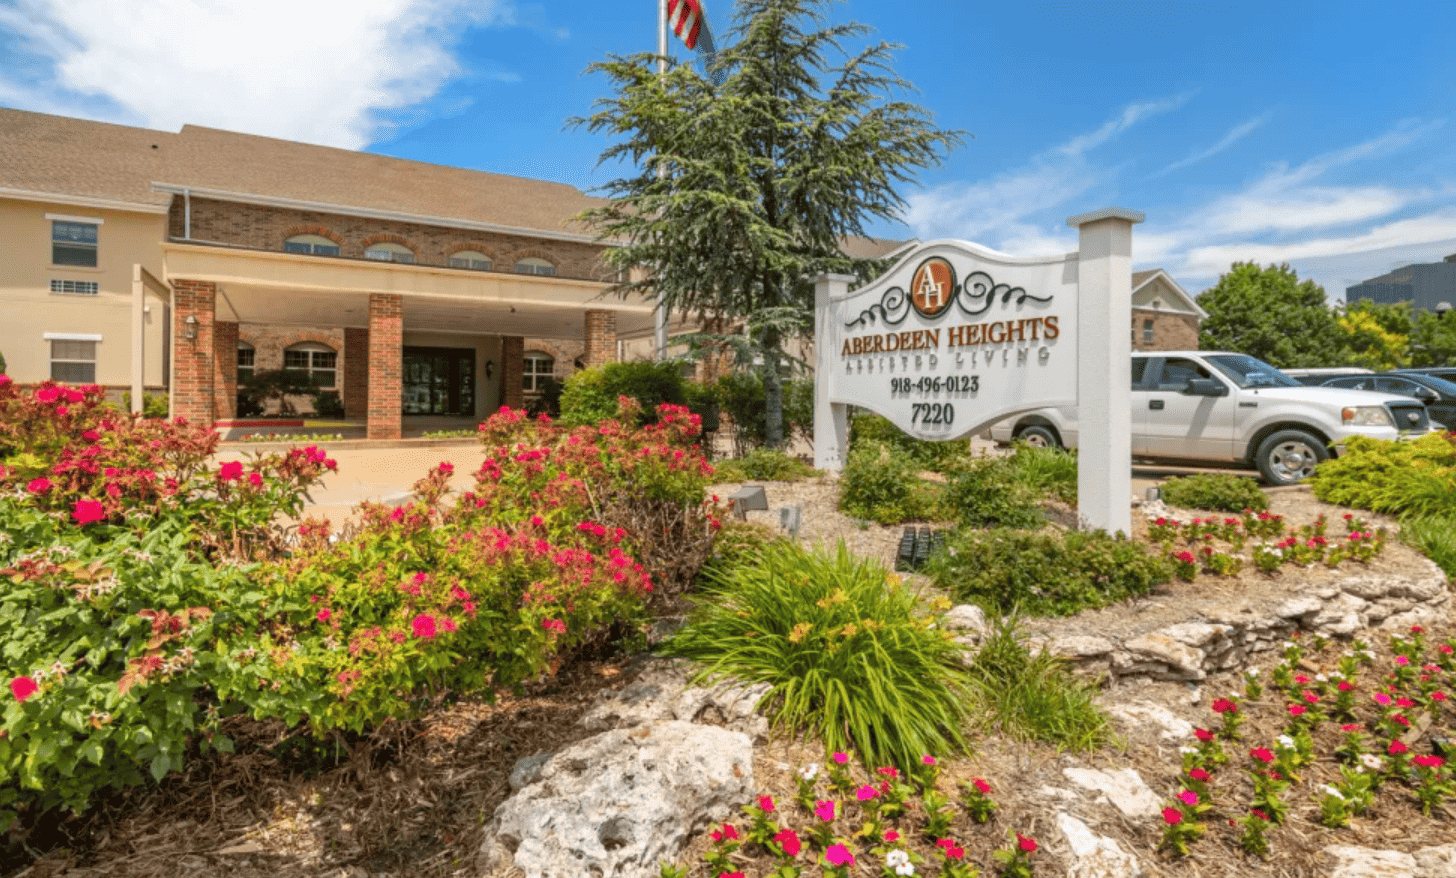 Aberdeen Heights Assisted Living